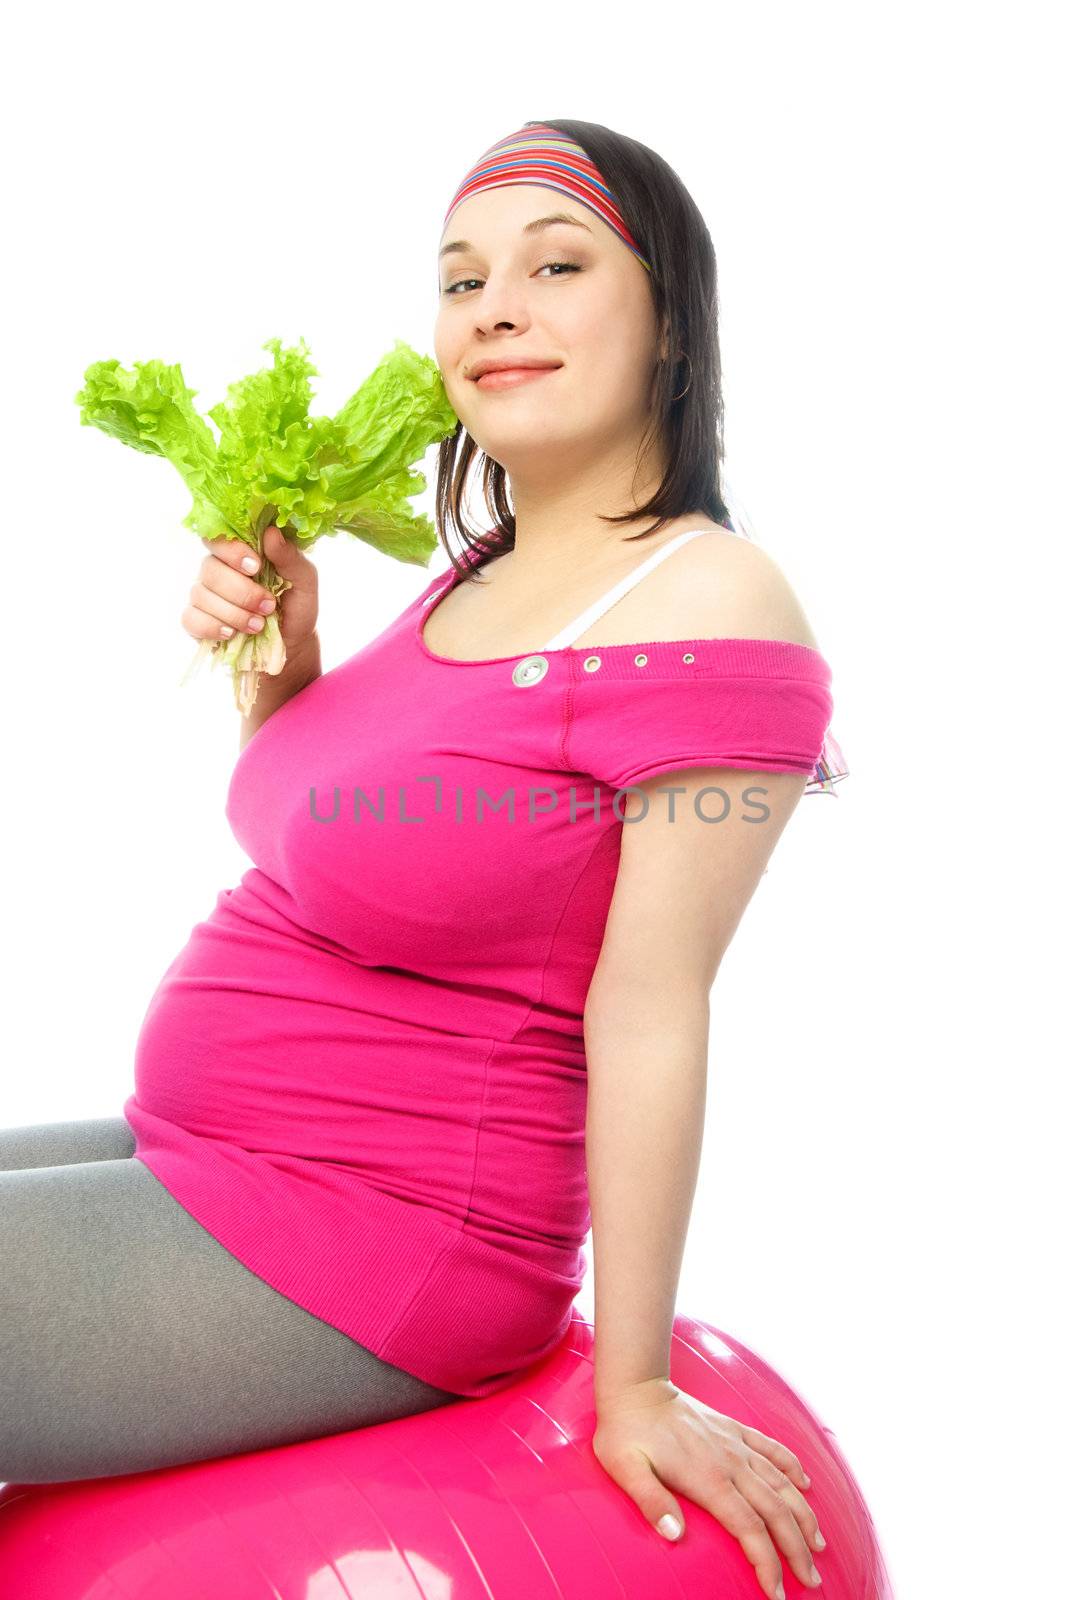 pregnant woman on the fitness ball eating salat by lanak